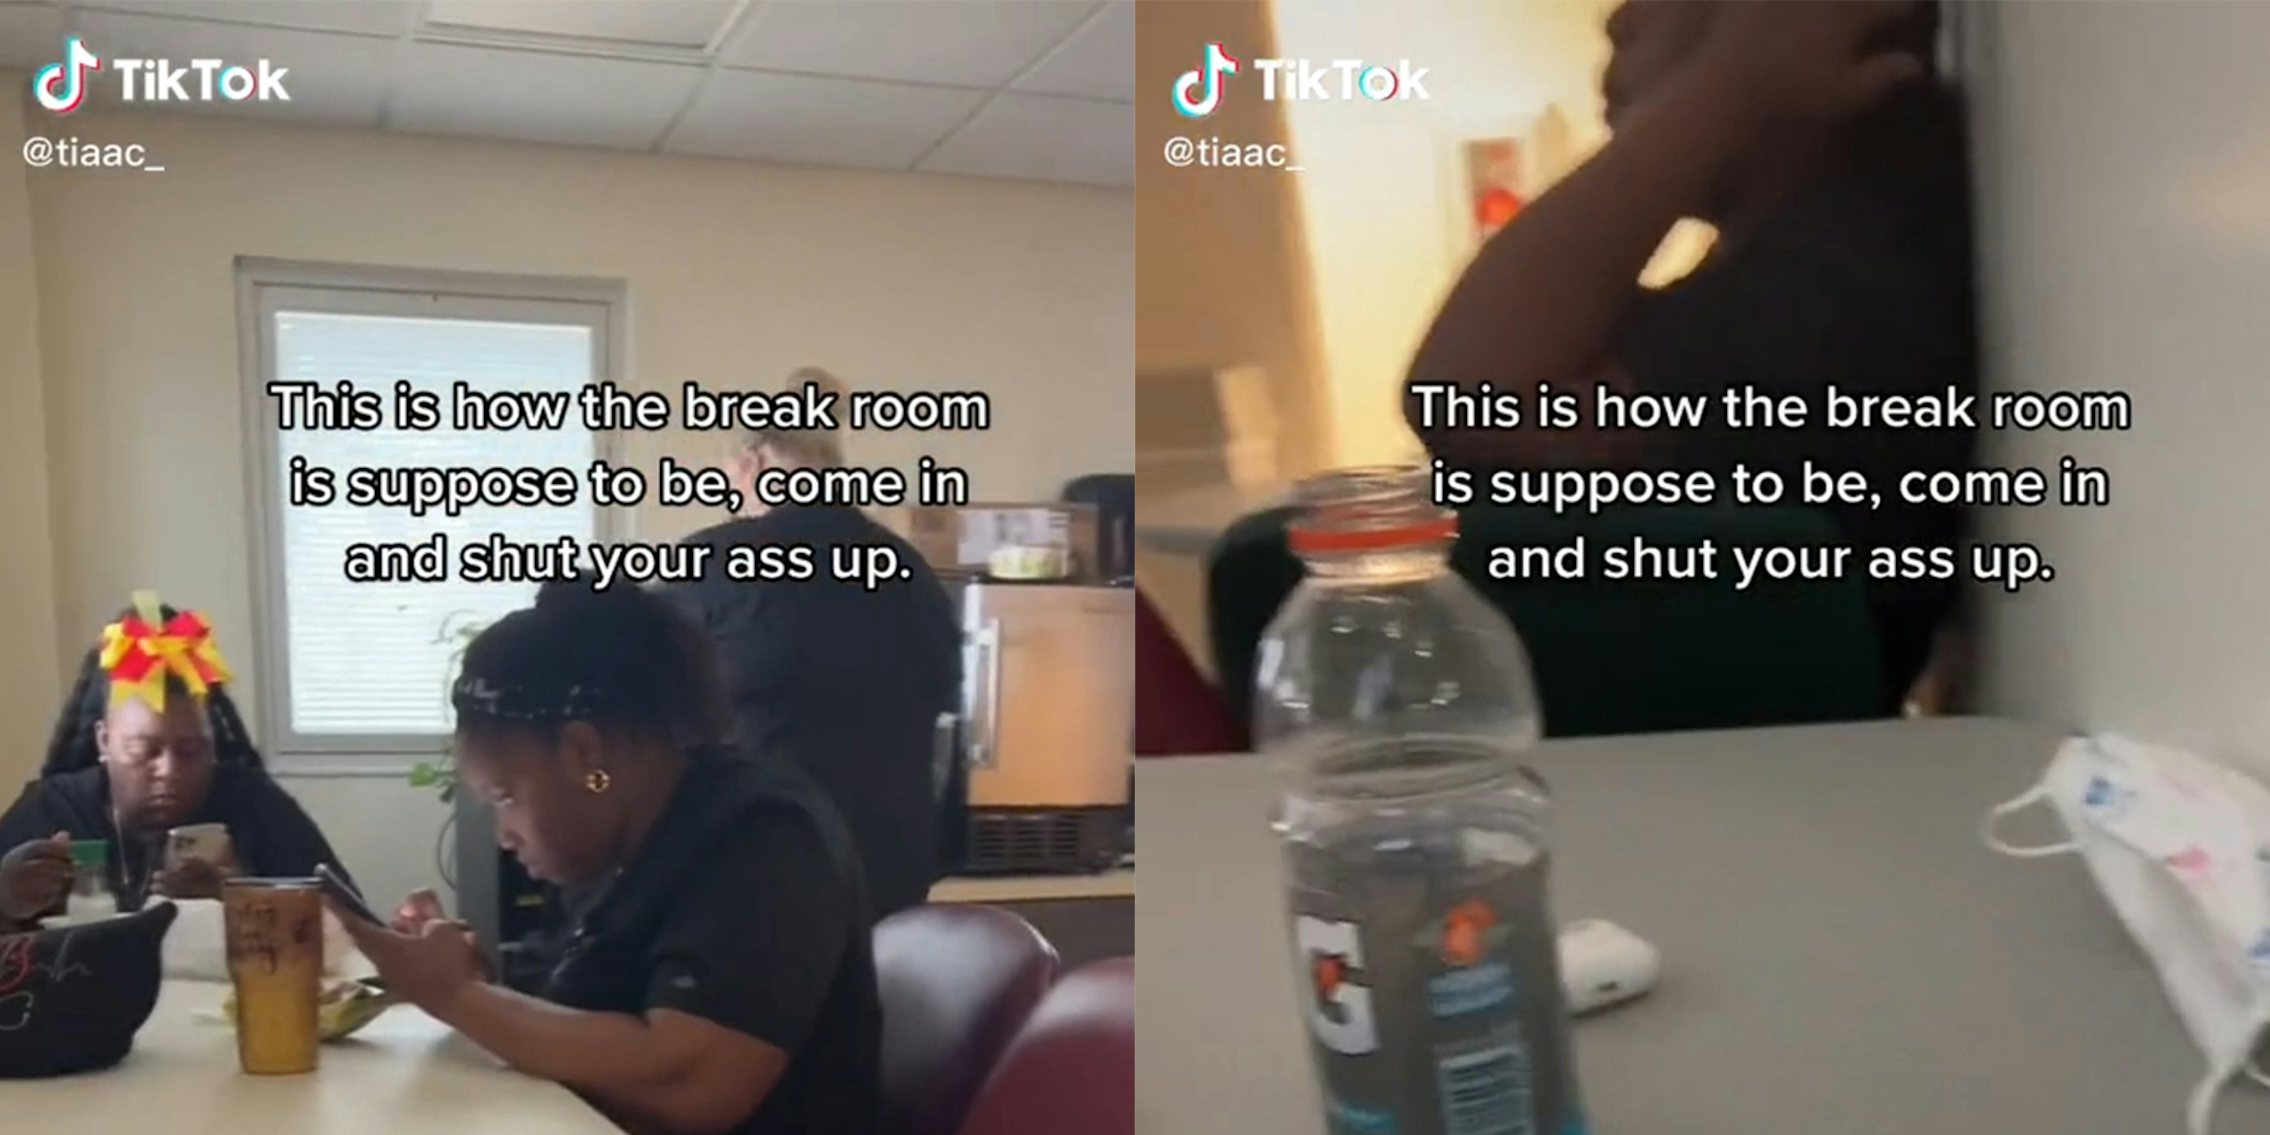 people in break room with caption 'This is how the break room is suppose to be, come in and shut your ass up.'